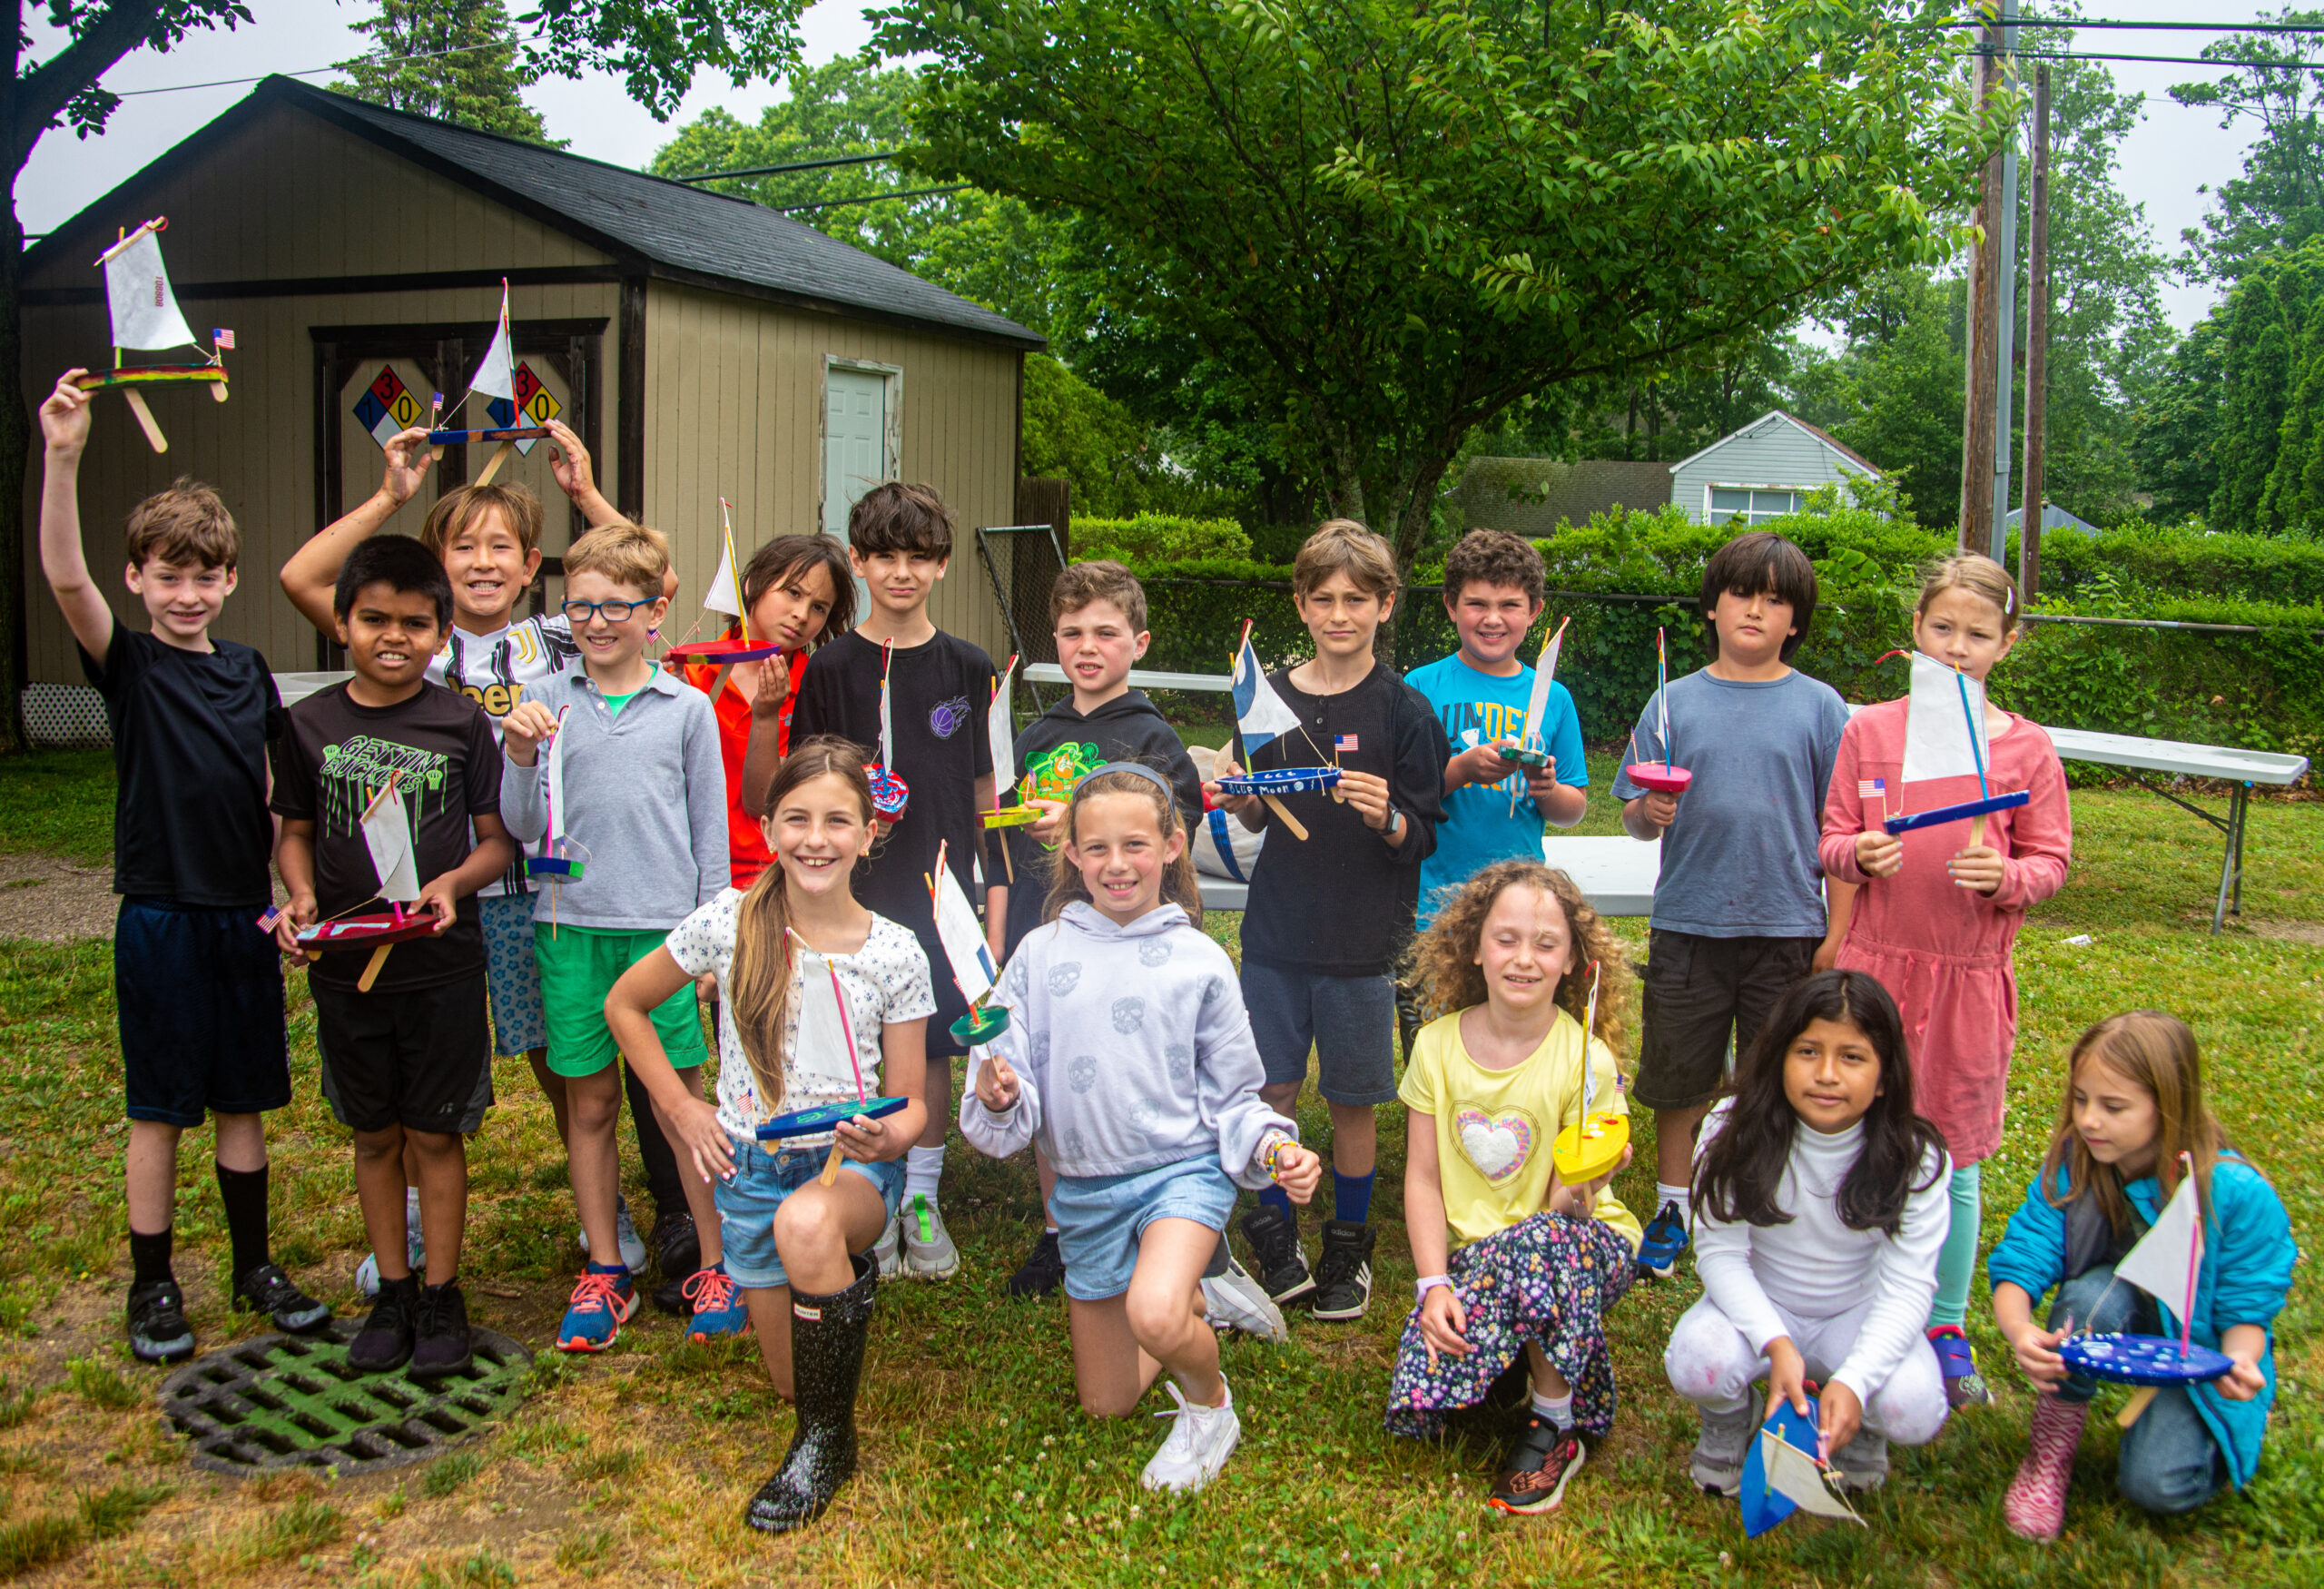 Sag Harbor Elementary School students learn the basics of boating through a program offered by the East End Classic Boat Society. COURTESTY EAST END CLASSIC BOAT